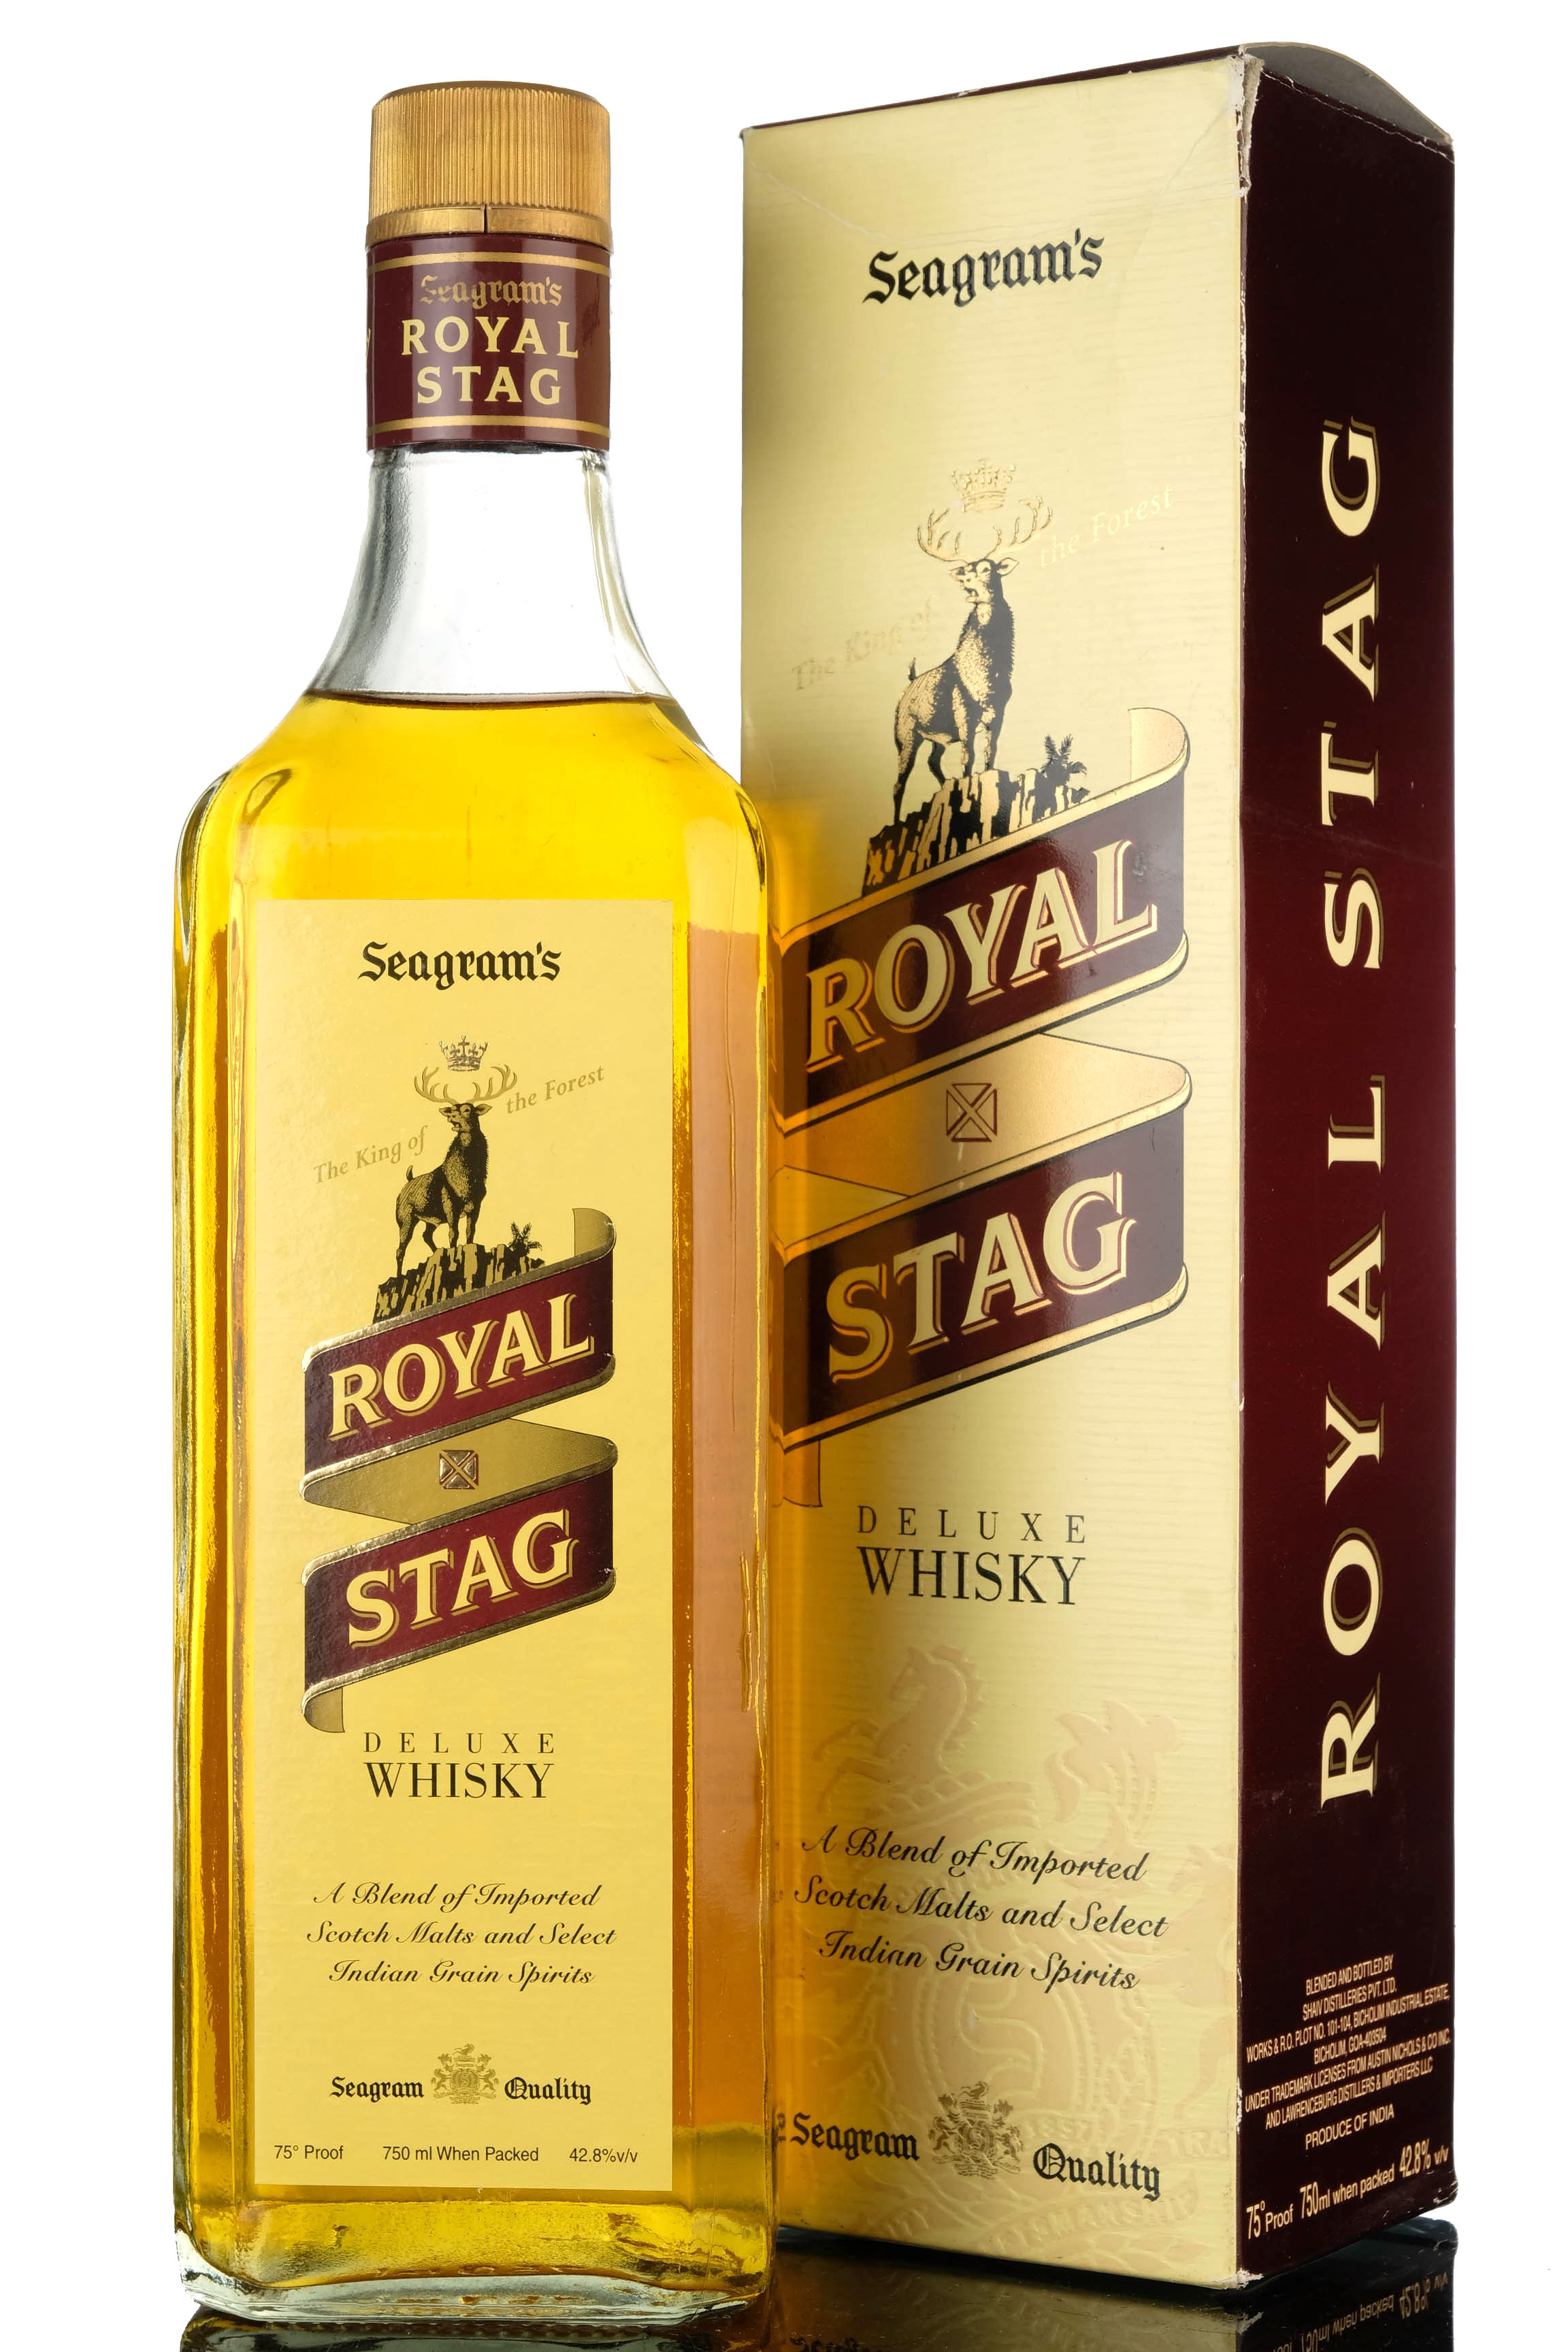 Royal Stag Blended Scotch Whisky